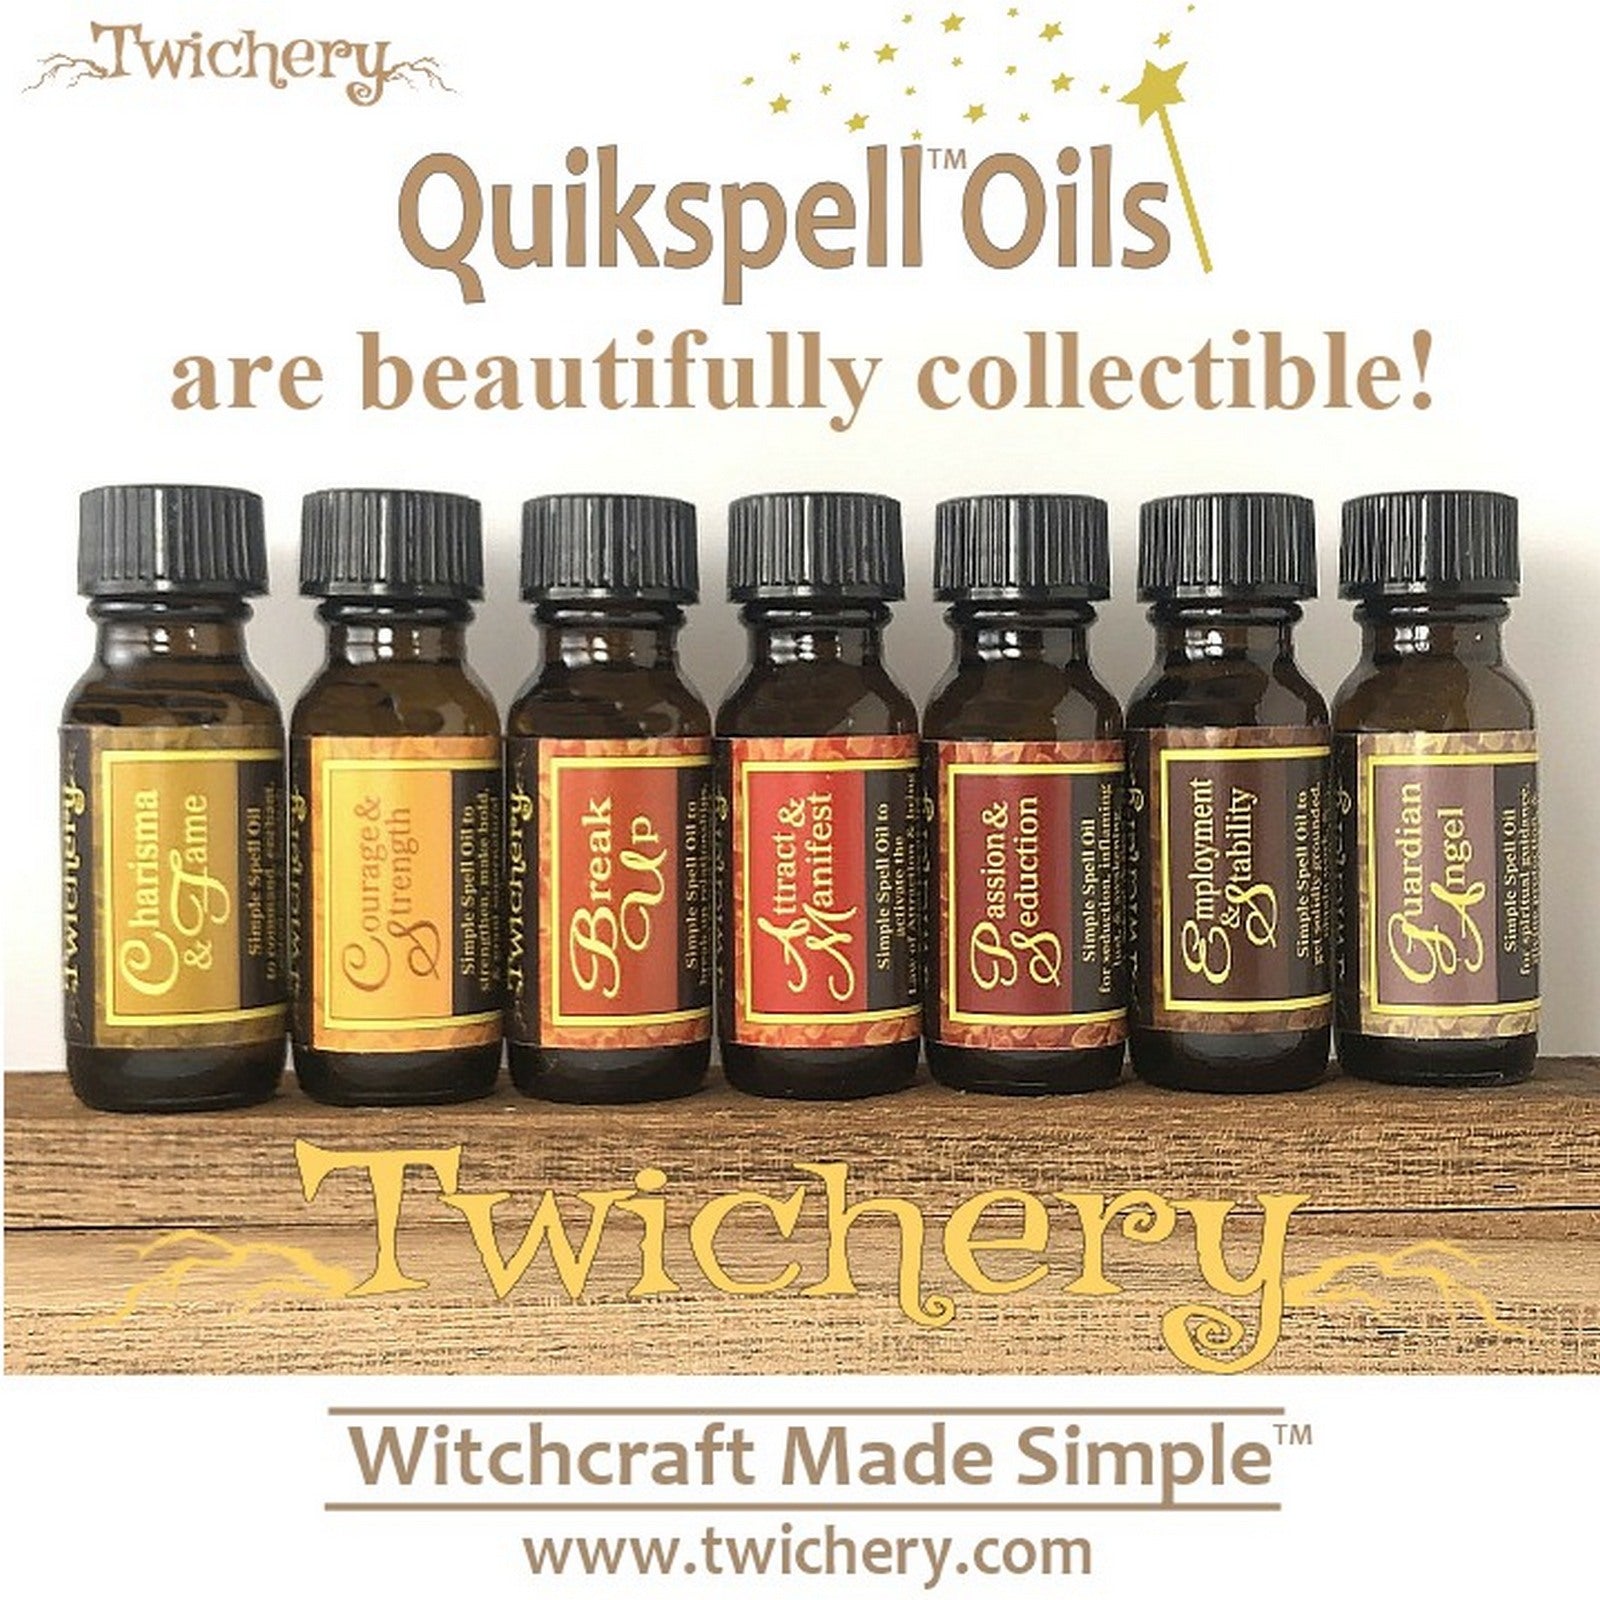 Collect all 24 Twichery Quikspell Oils for all your magickal needs, including new beginnings! Hoodoo, Voodoo, Wicca, Witchcraft Made Simple